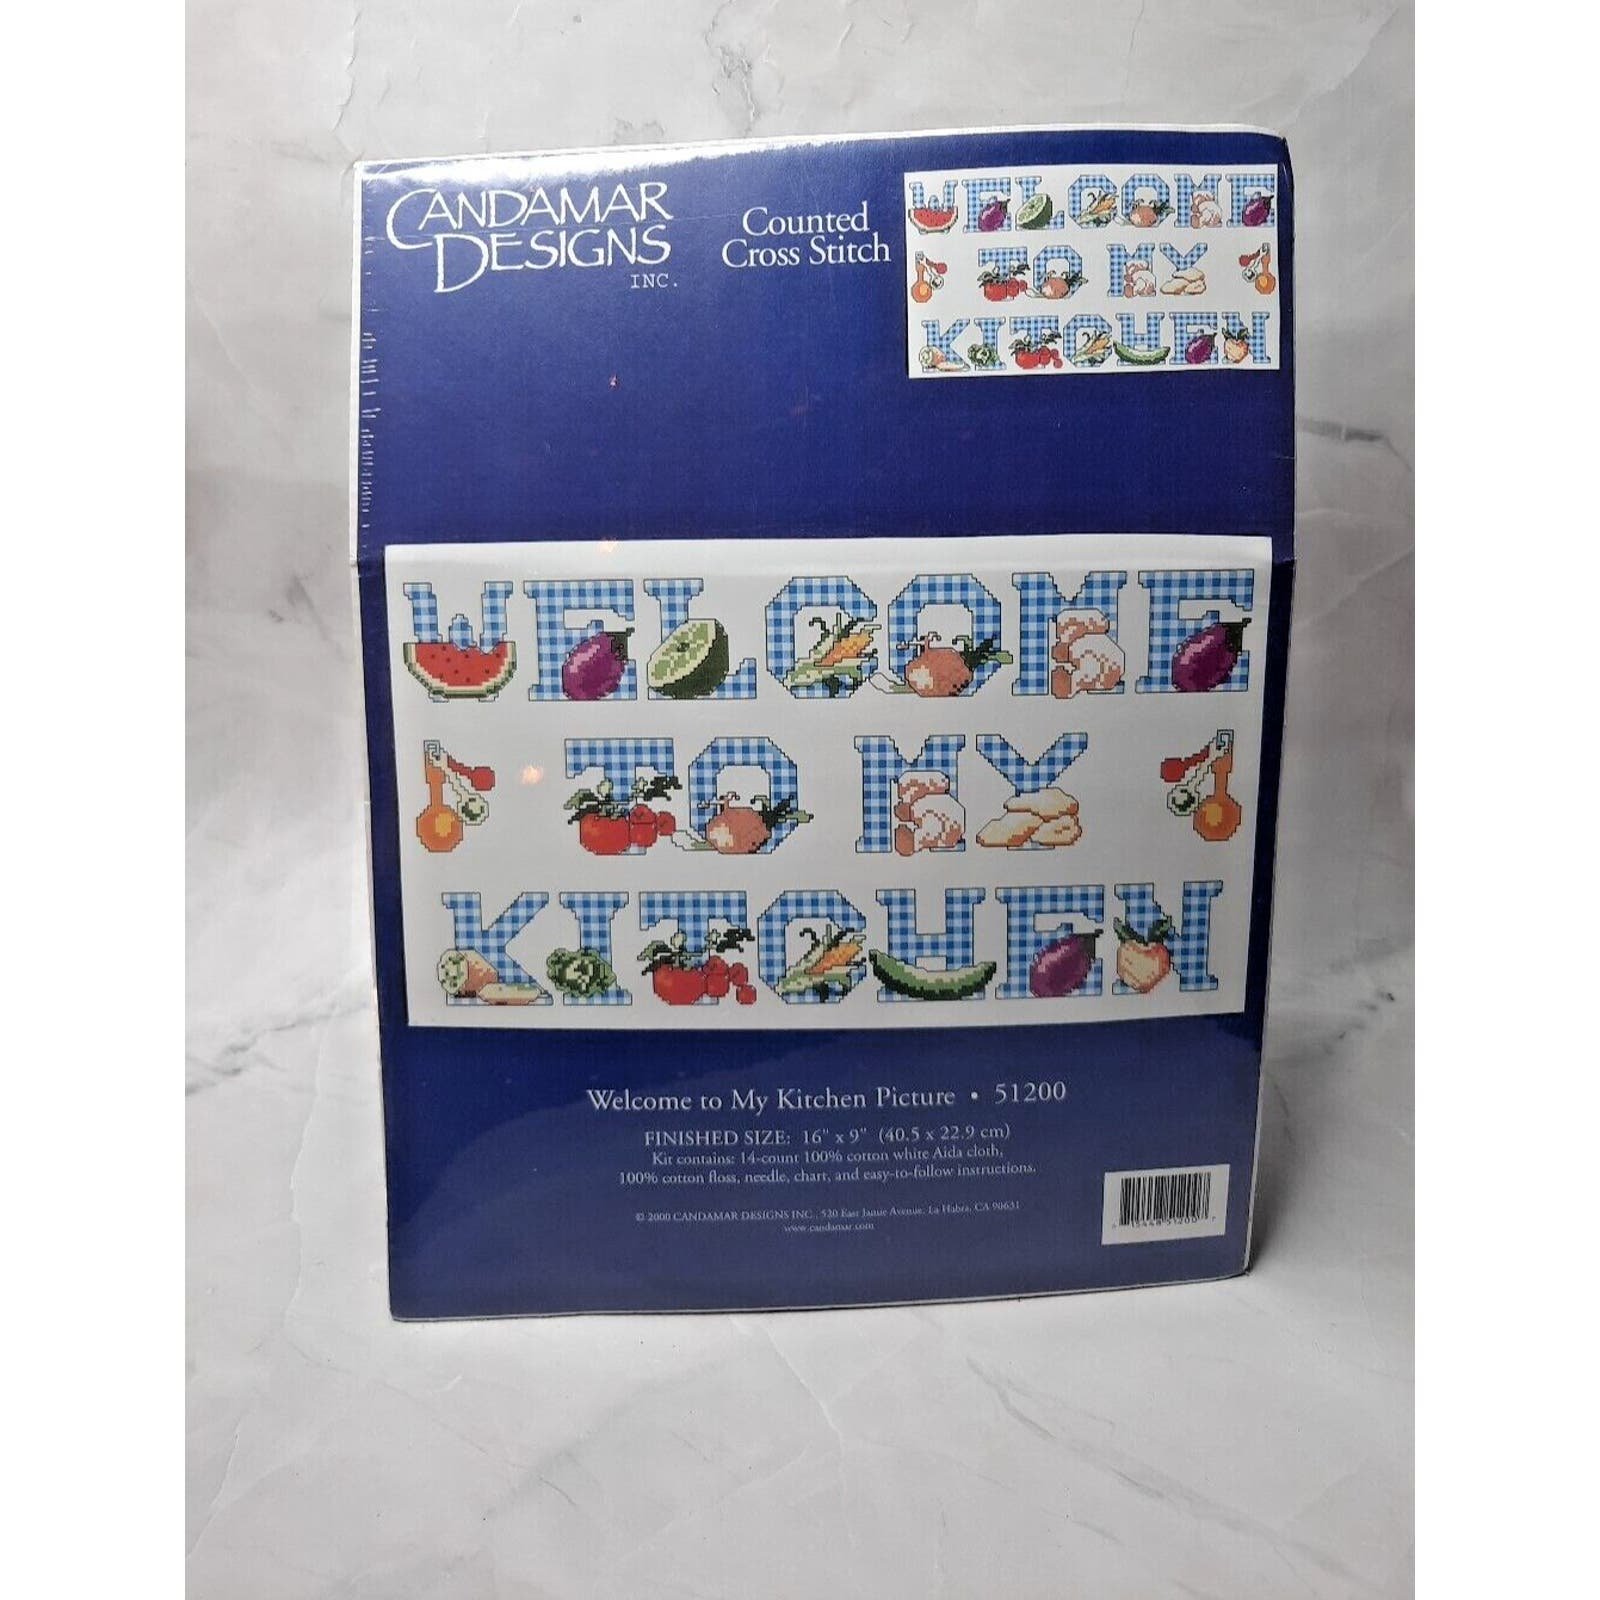 Candamar Counted Cross Stitch Kit Welcome to My Kitchen Picture 51200 16x9 Dje4Q19DY